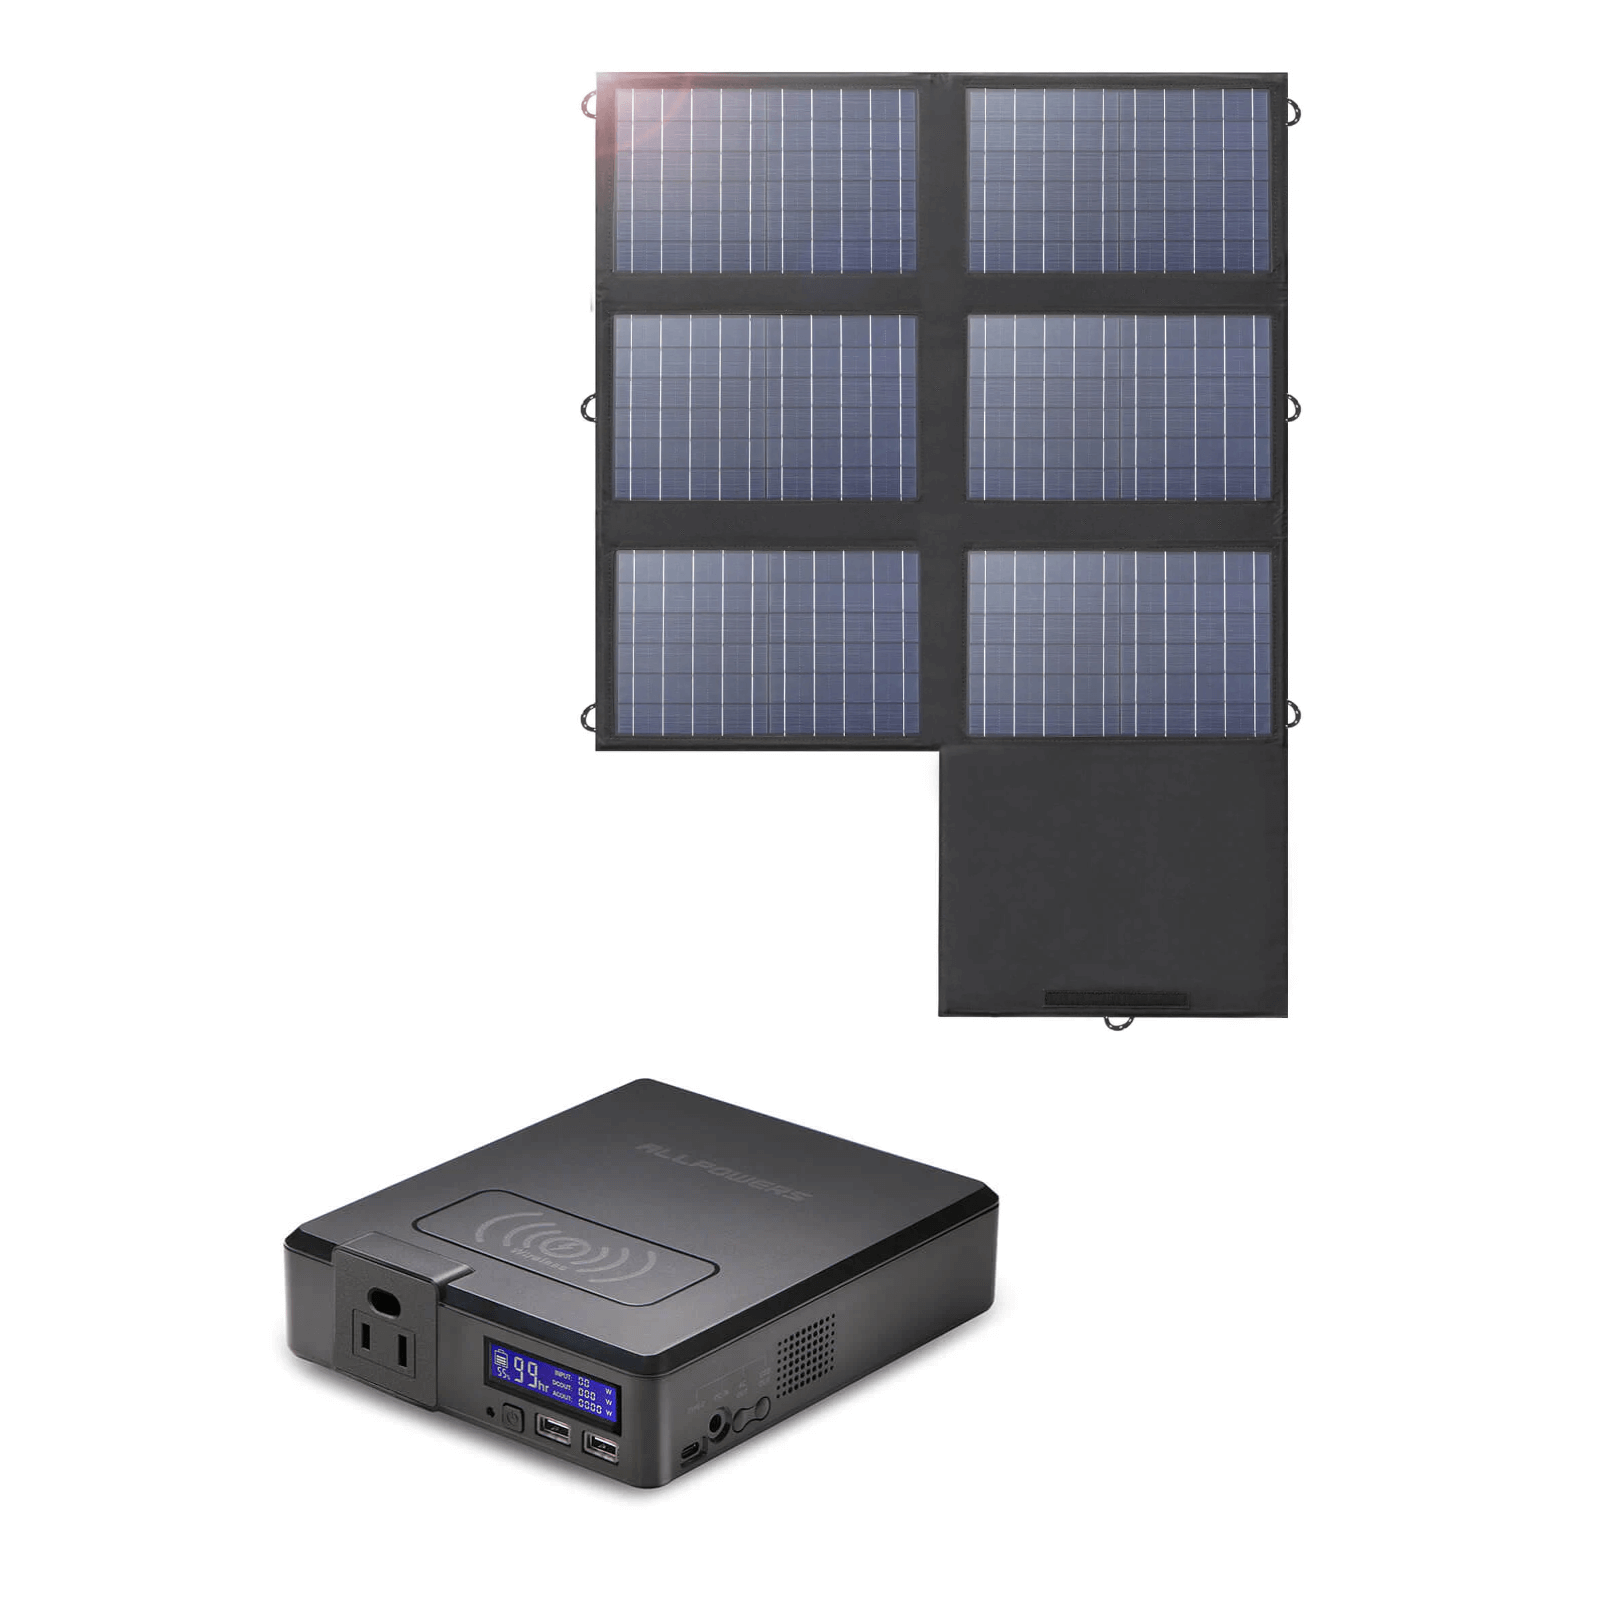 ALLPOWERS S200 Portable Power Bank 200W 154Wh (S200 + SP026 60W Solar Panel)